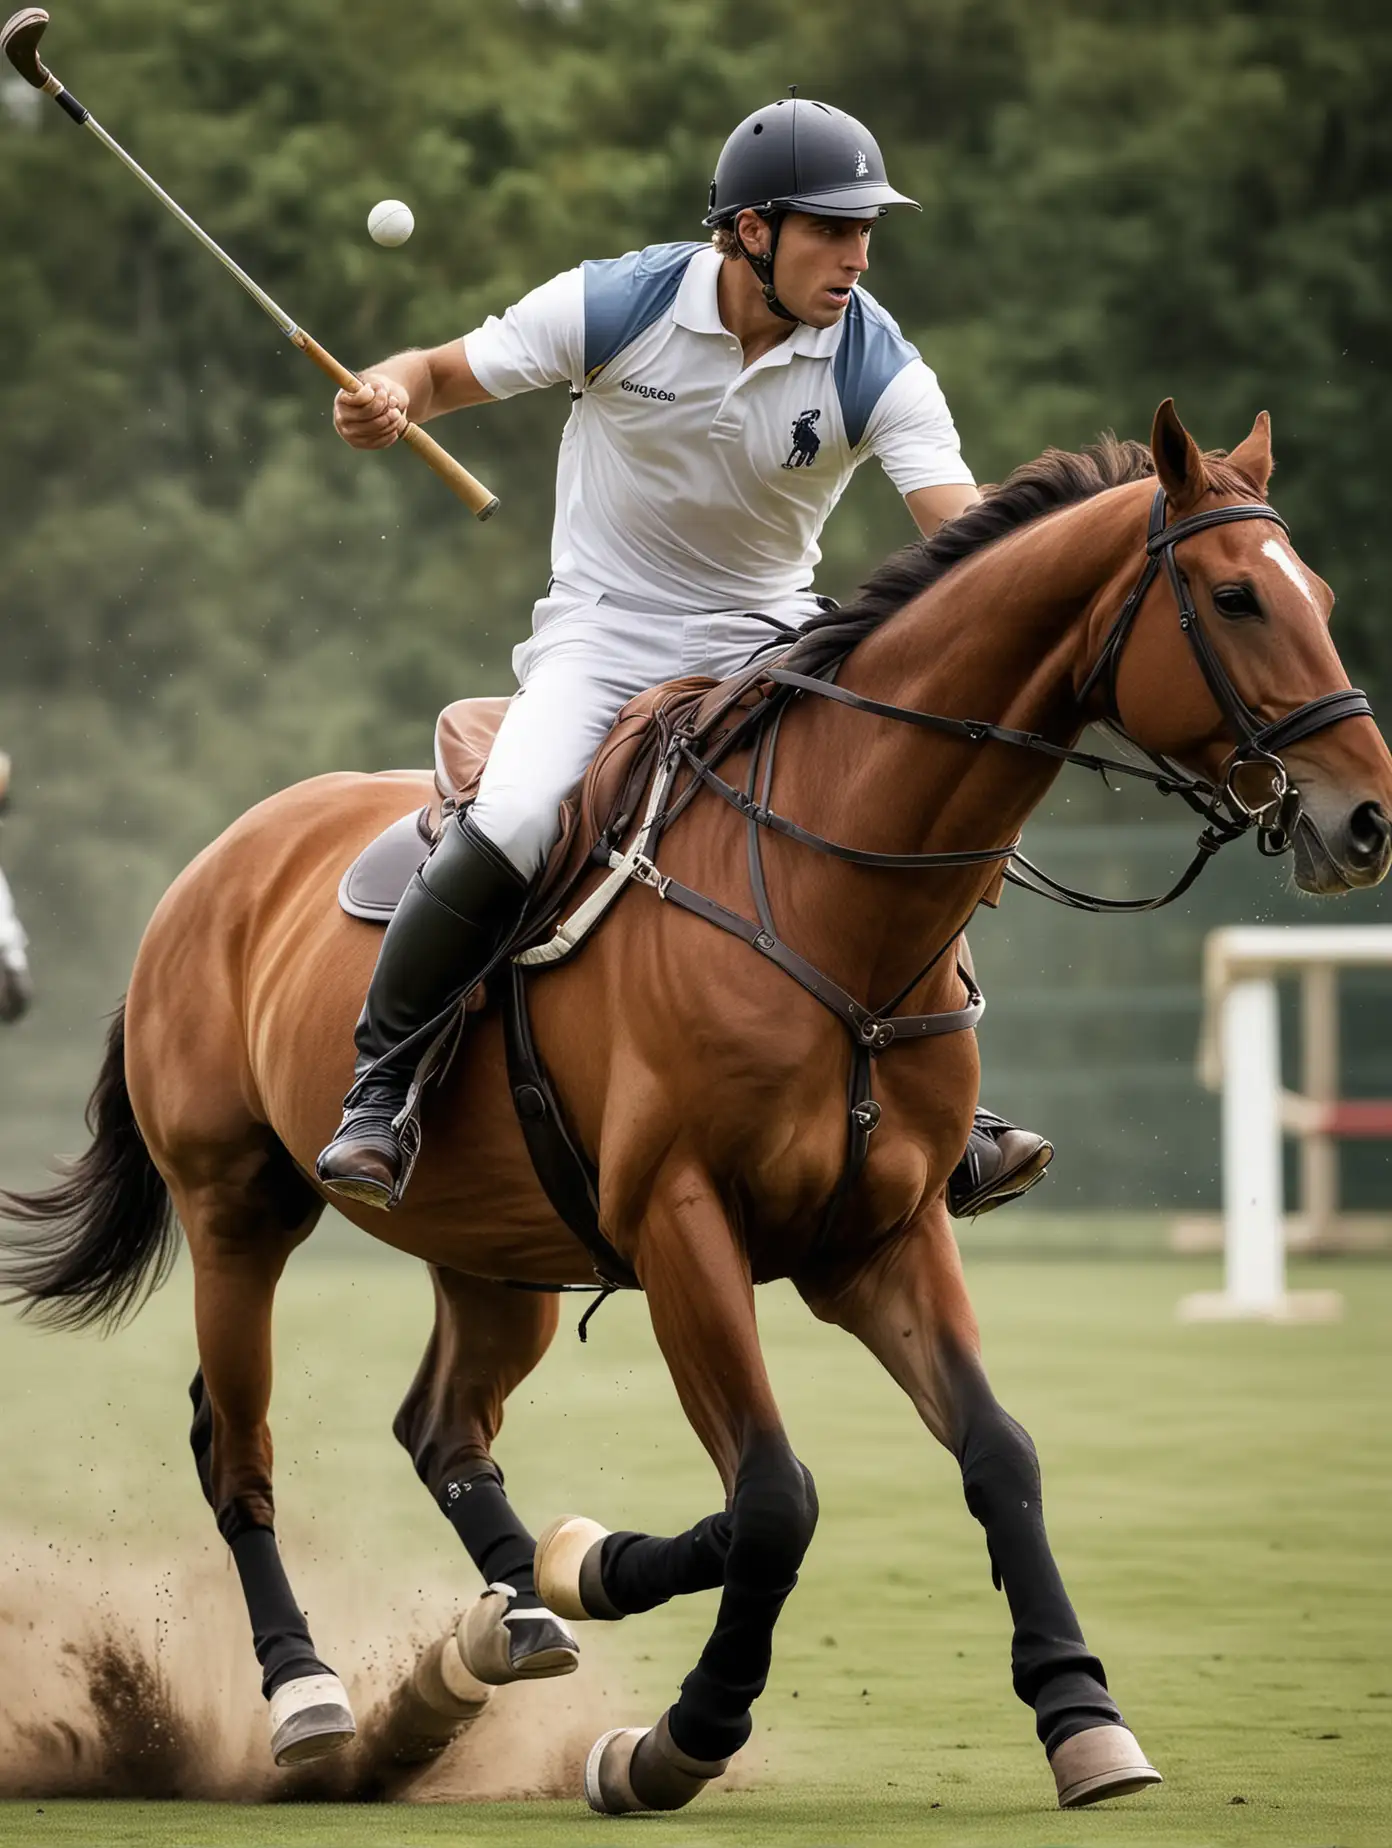 Dynamic Polo Player Riding Horse in Intense Ball Pursuit